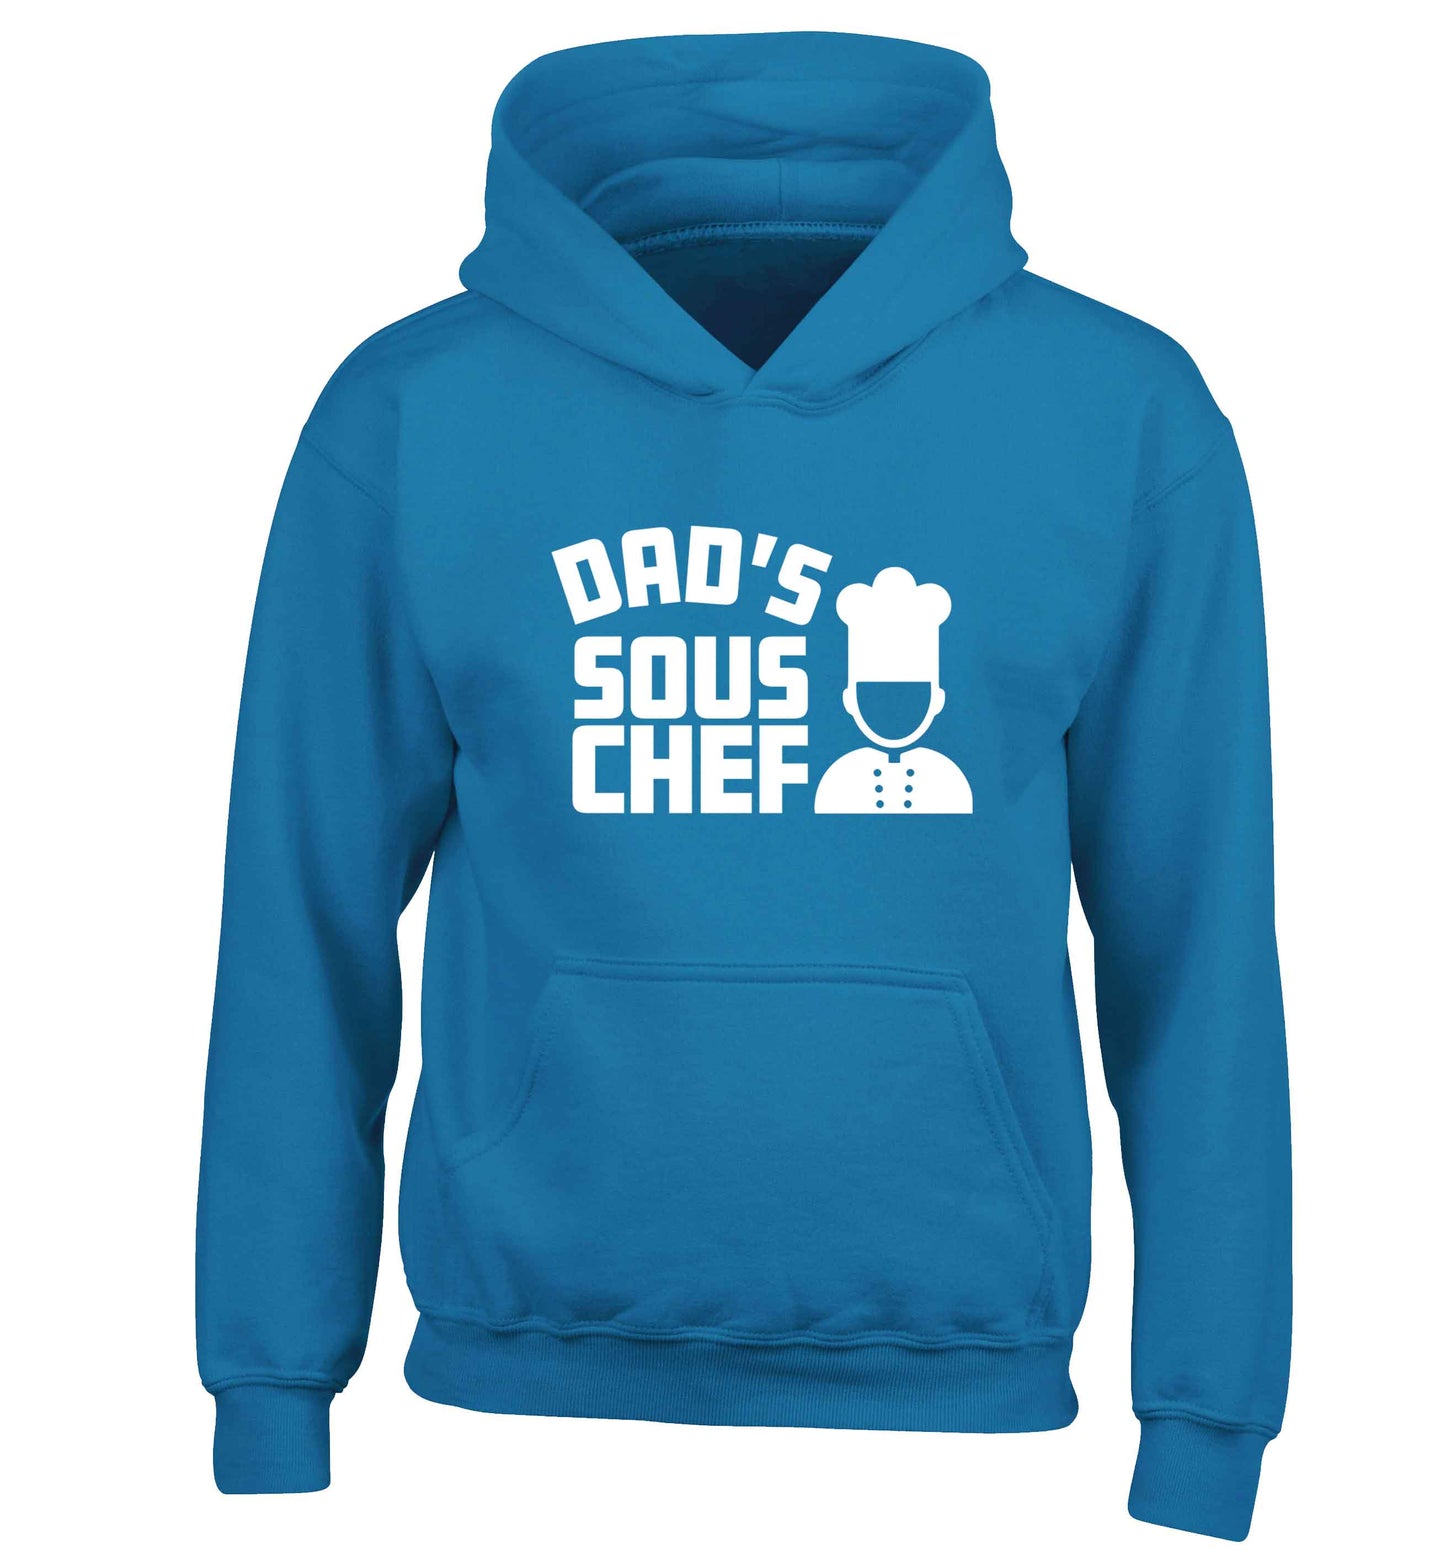 Dad's sous chef children's blue hoodie 12-13 Years